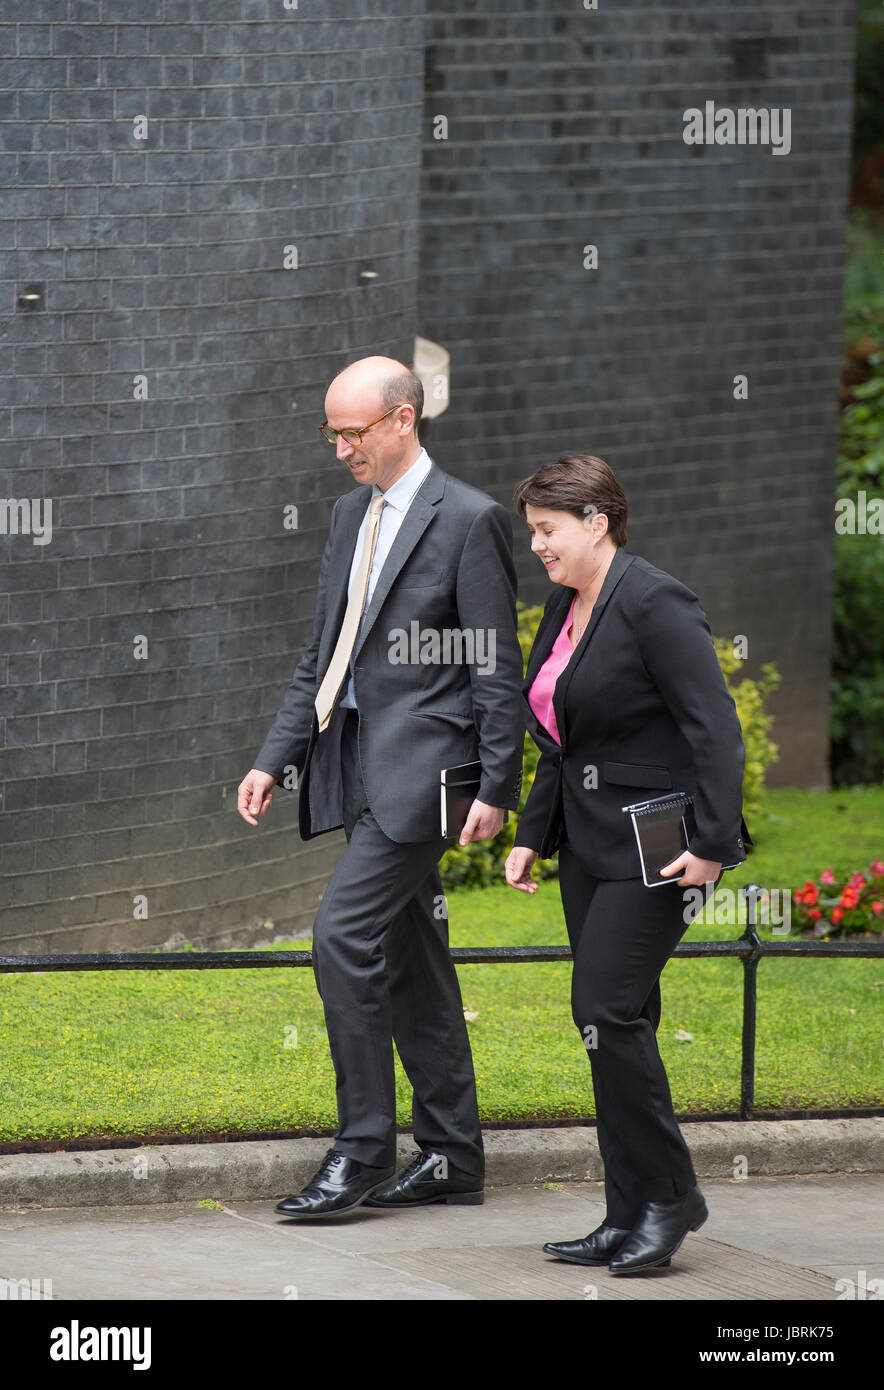 Downing Street, London, UK. 12th June, 2017. Scottish Conservative leader Ruth Davidson arrives in Downing Street before the first cabinet meeting of the new conservative government of PM Theresa May since the general election. Credit: Malcolm Park/Alamy live News. Stock Photo